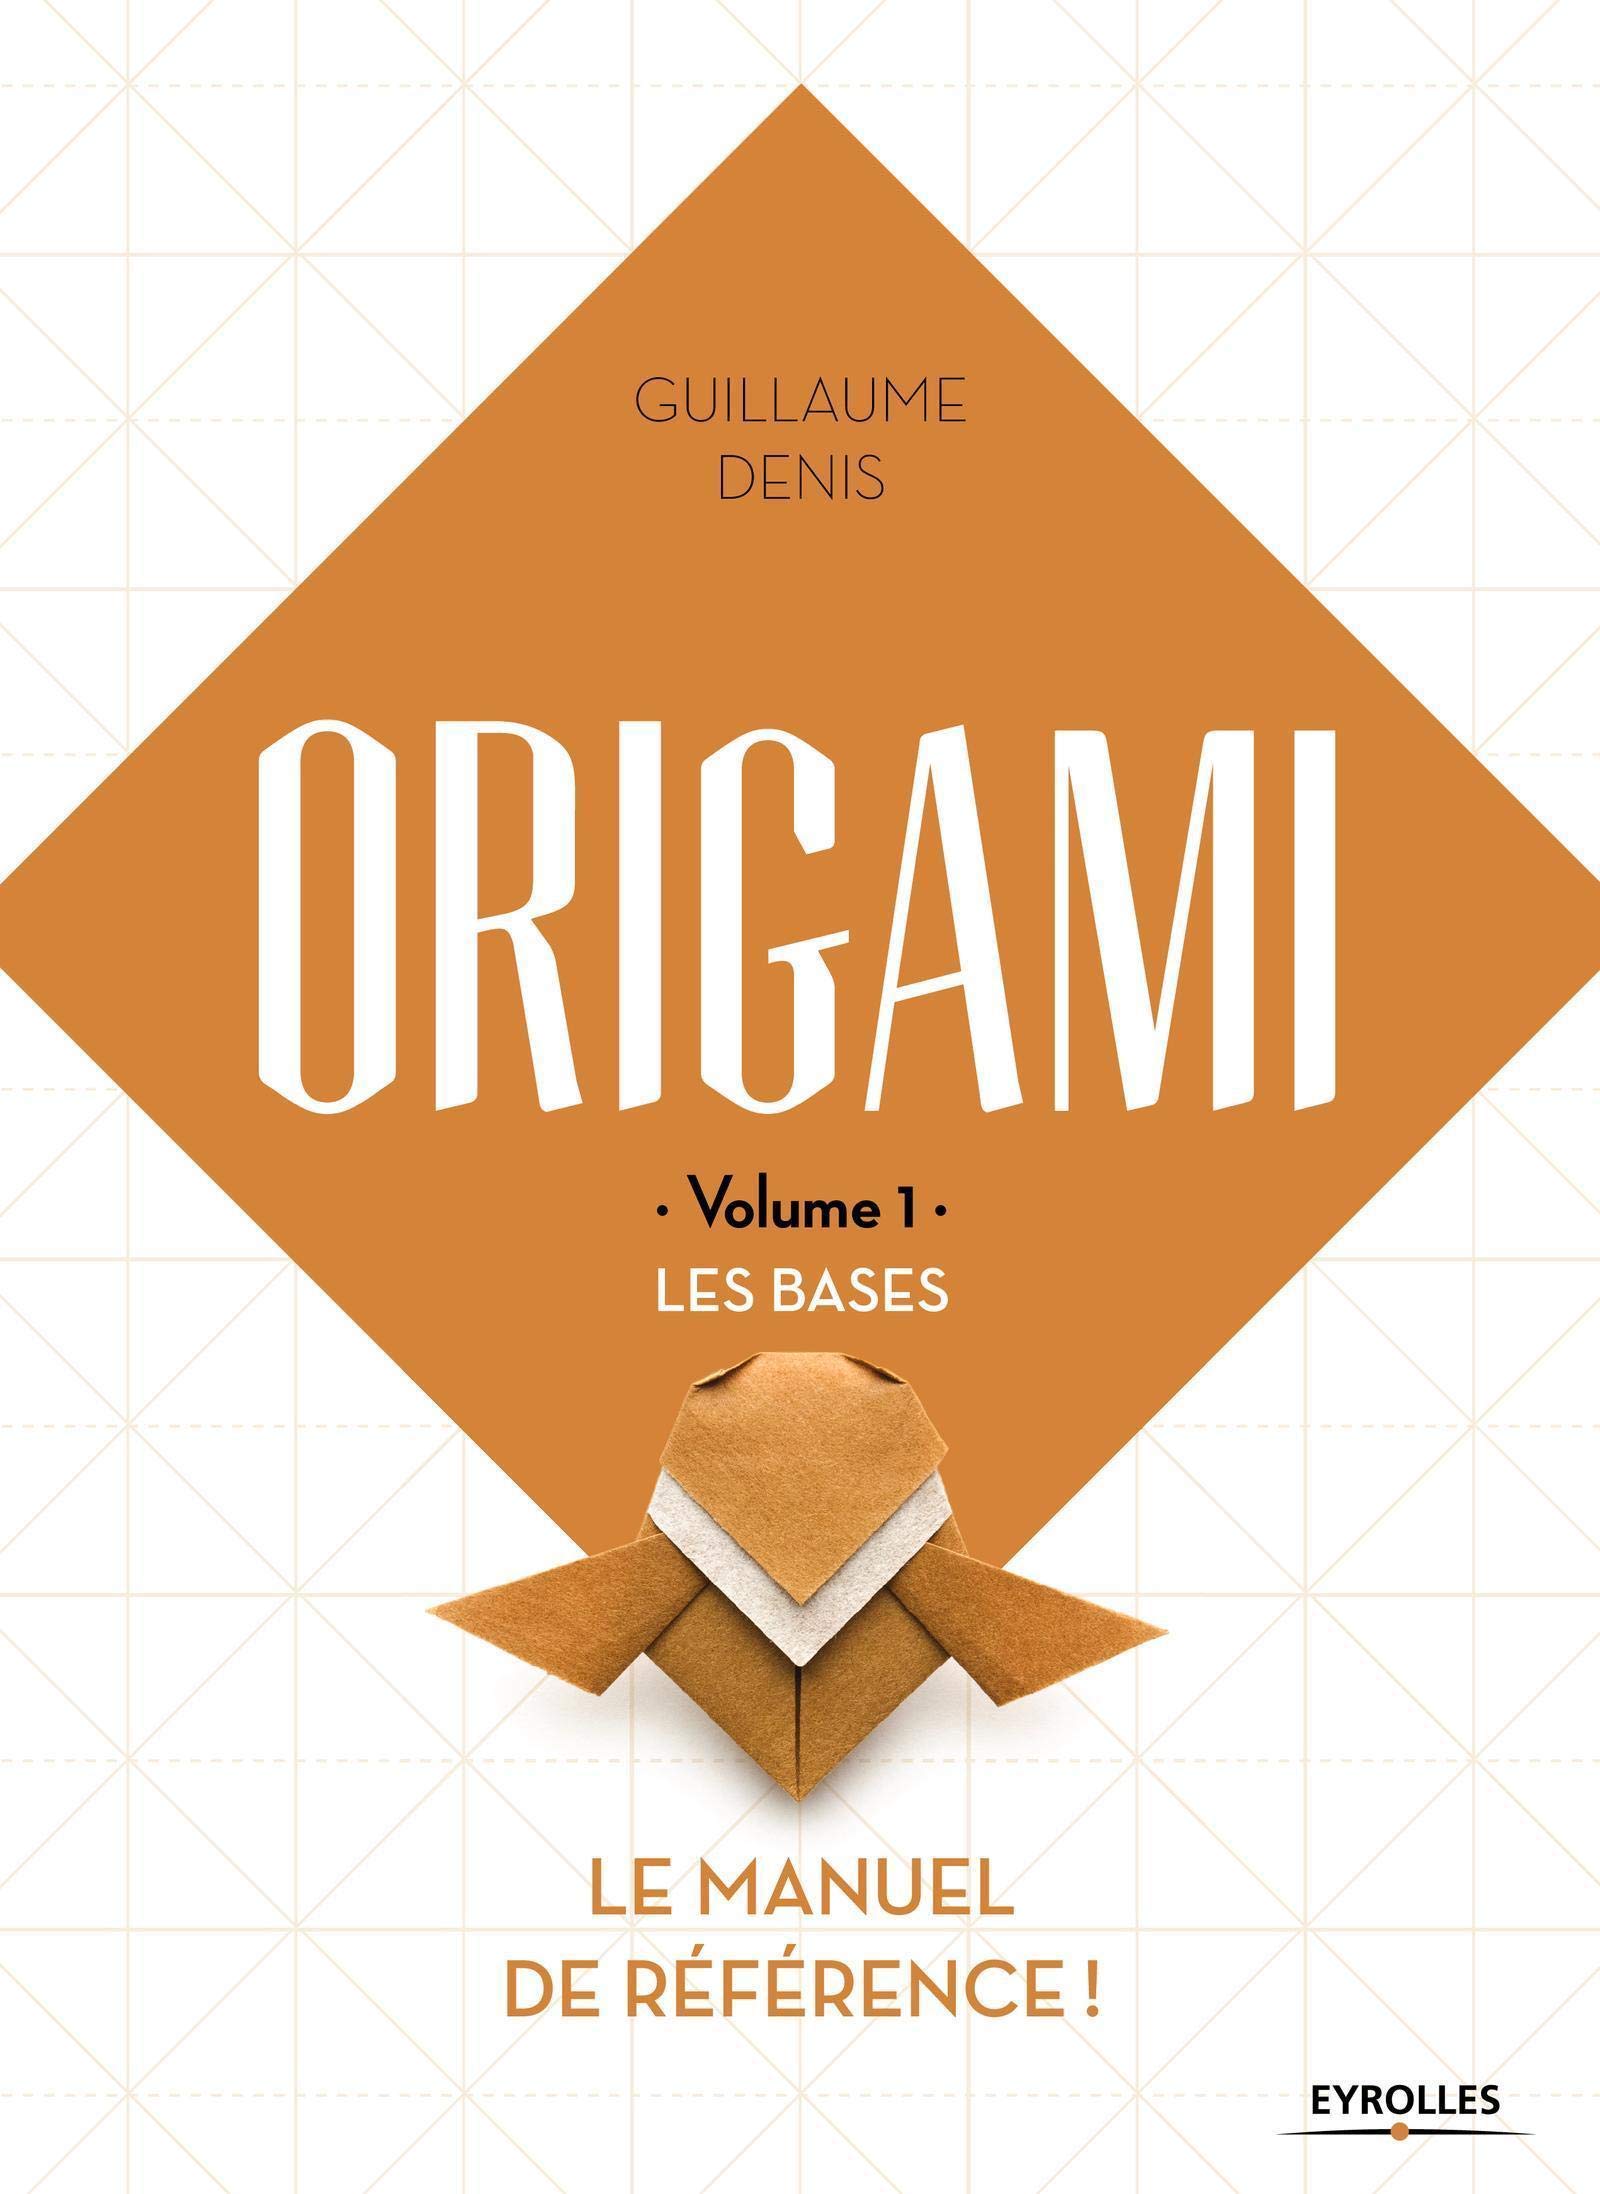 ORIGAMI - Volume 1 - LES BASES : page 86.